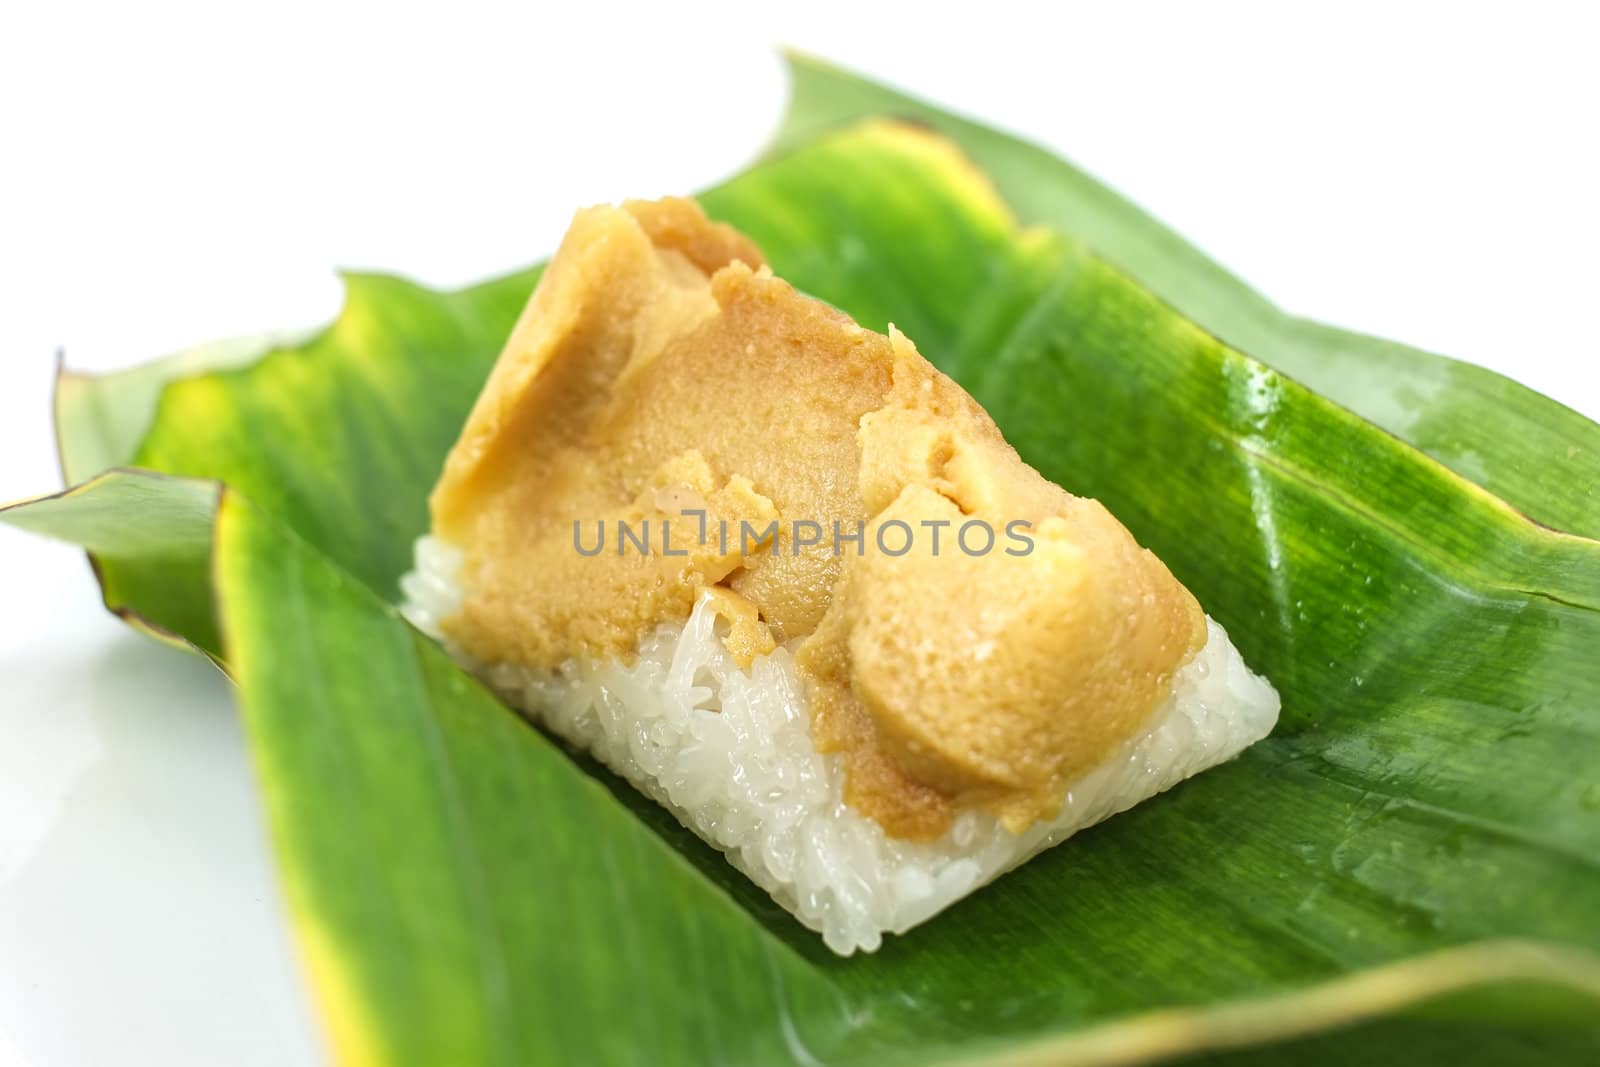 Thai dessert, Sticky rice with steamed custard, wrapped in banana leaves.